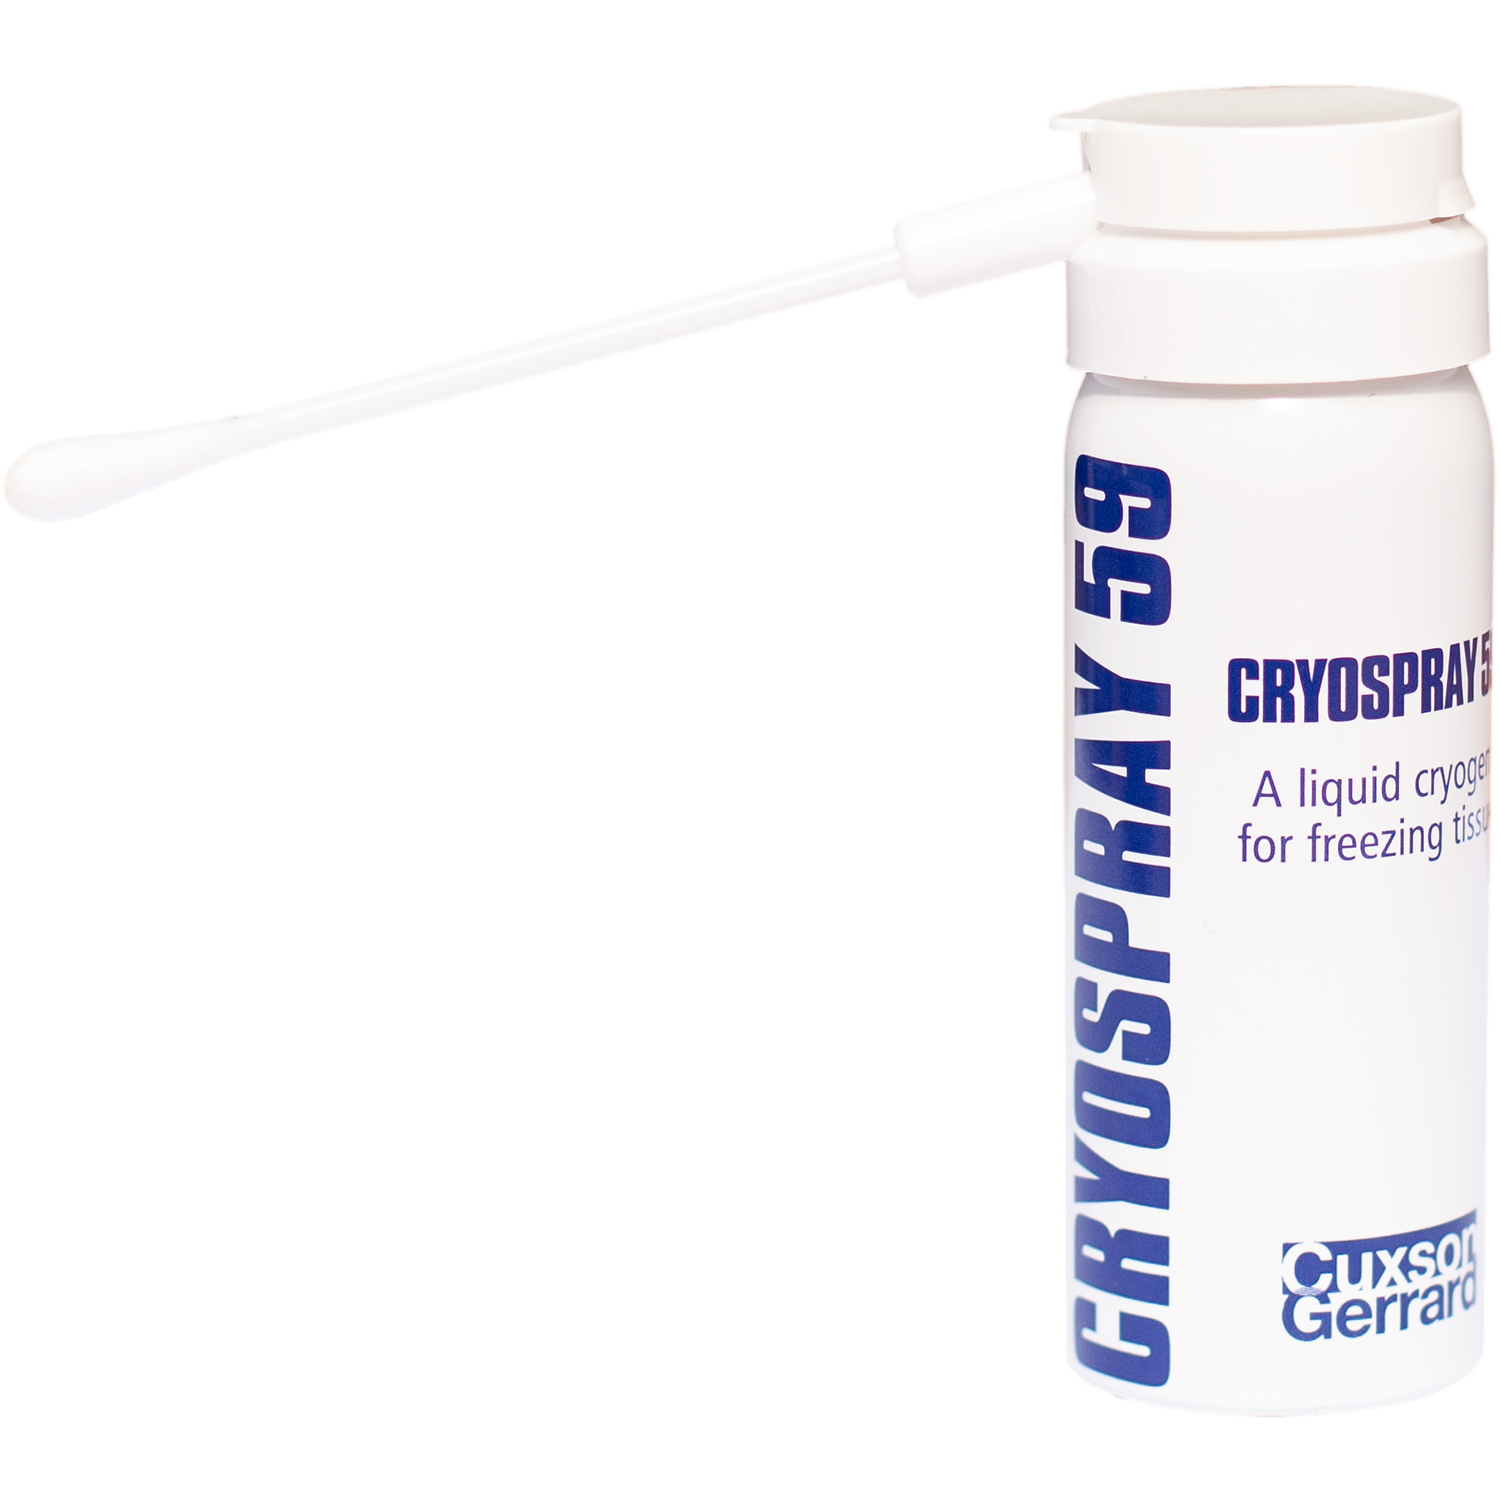 Cryospray 59 | 50ml | Pack of 6 Cans (3)